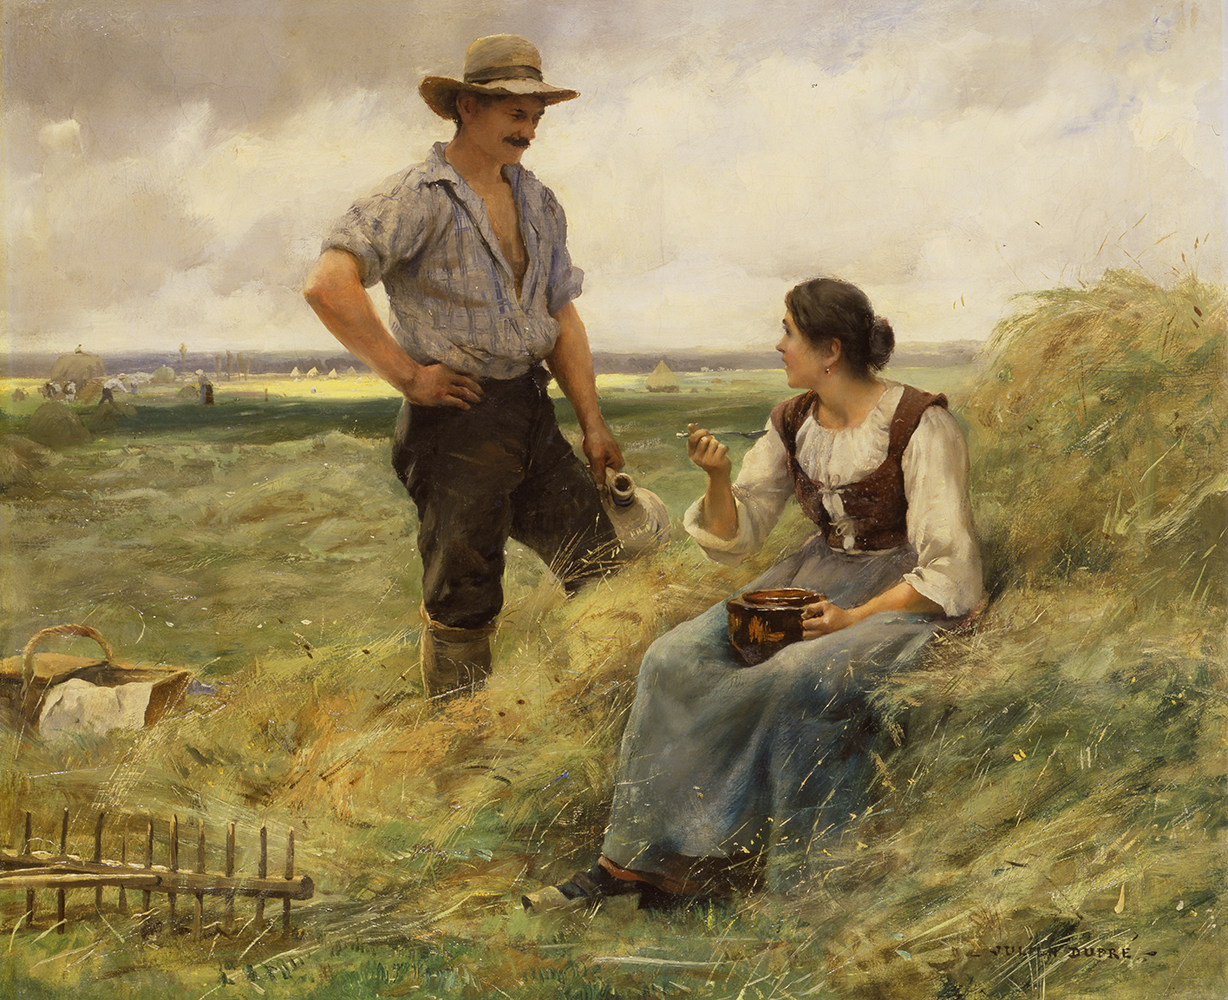 man and woman eating in the field